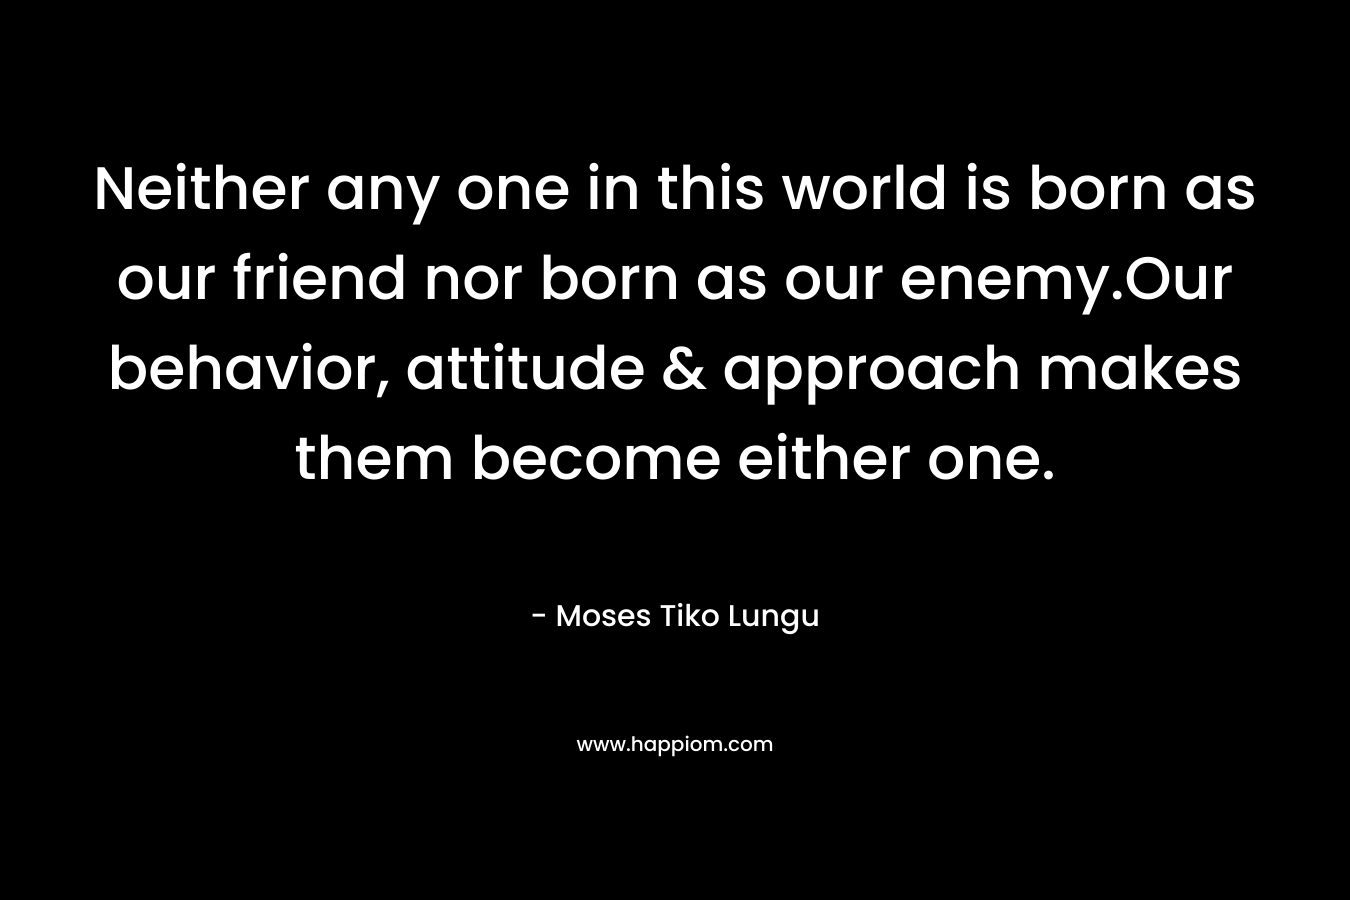 Neither any one in this world is born as our friend nor born as our enemy.Our behavior, attitude & approach makes them become either one. – Moses Tiko Lungu